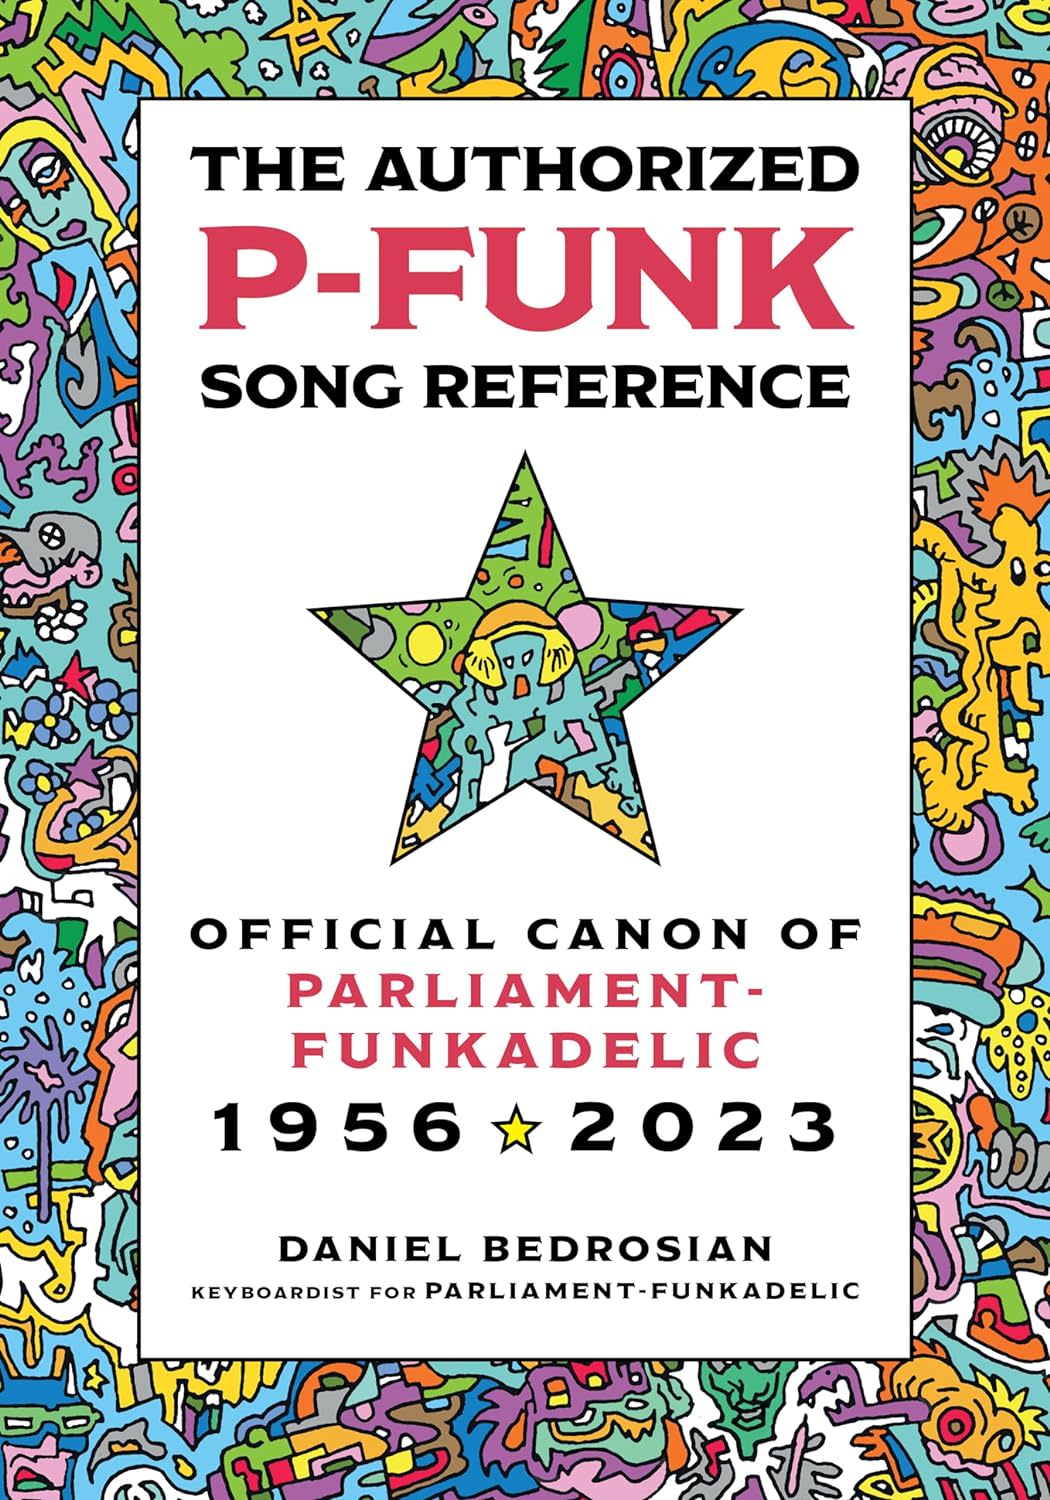 Daniel Bedrosian will play Jan. 27, 2024, at House of Music in support of his recent release, "The Authorized P-Funk Song Reference: Official Canon of Parliament-Funkadelic 1956-2023."